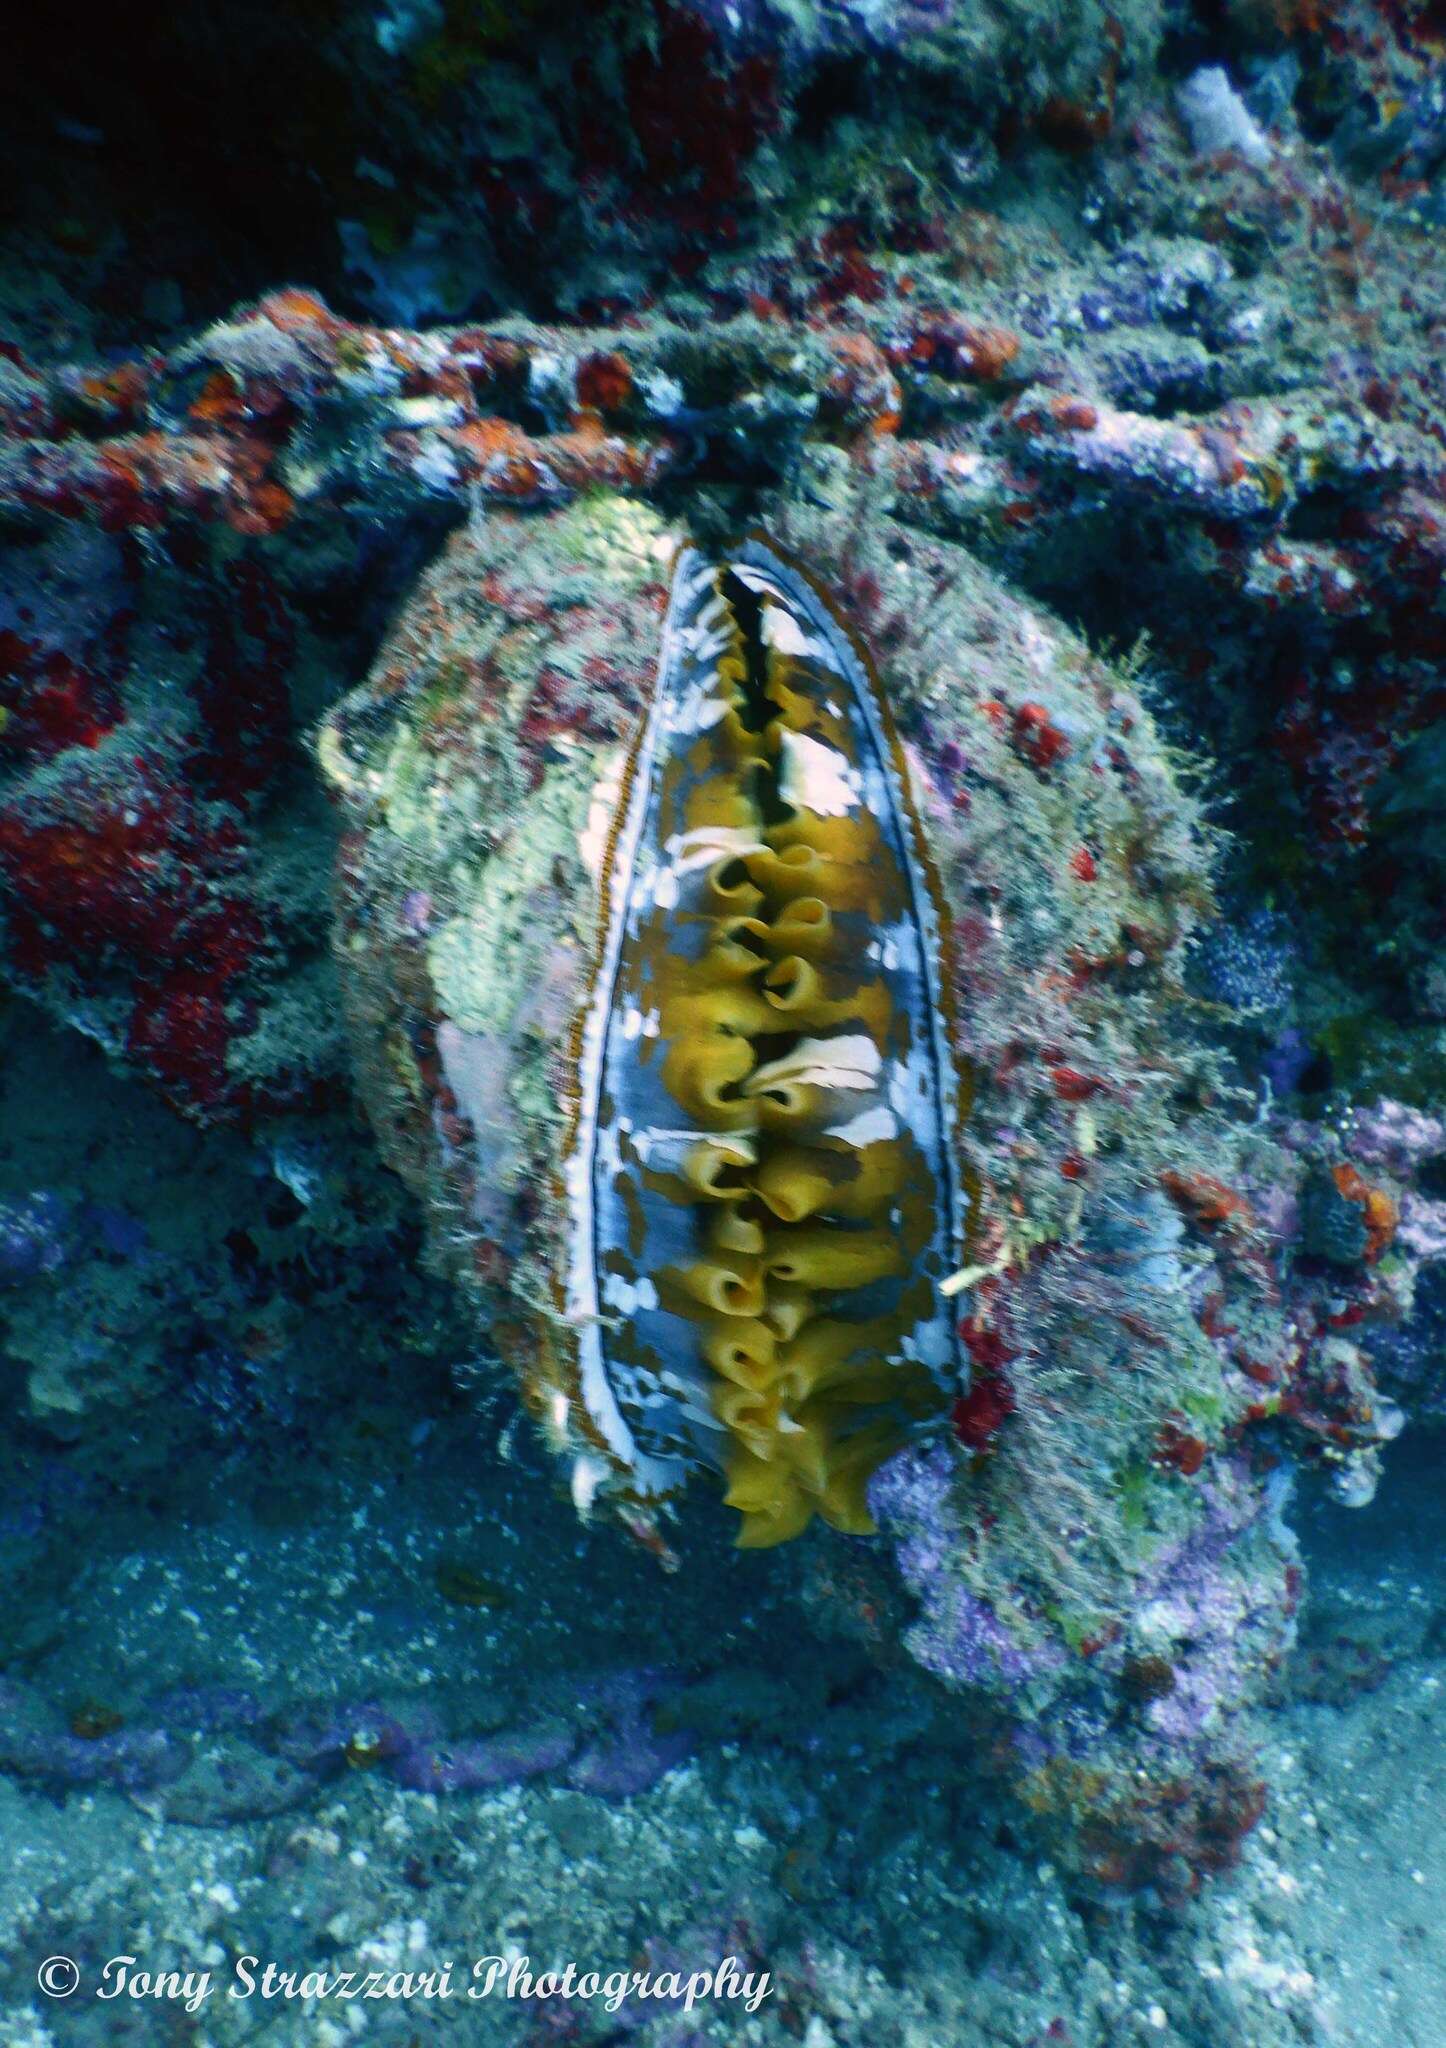 Image of Thorny oyster